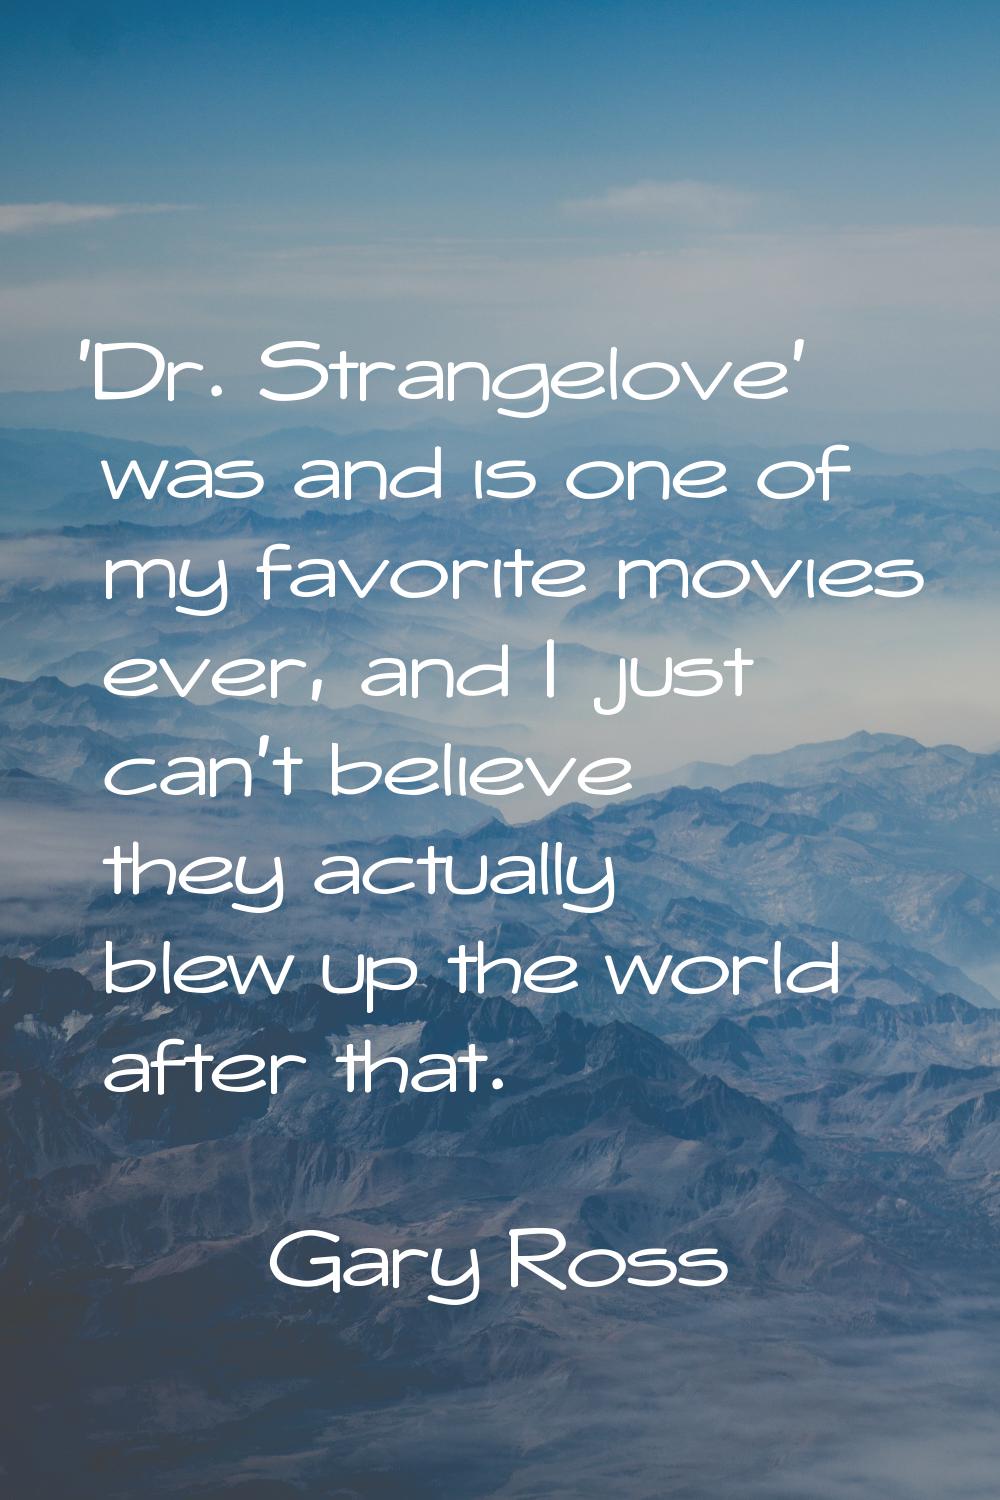 'Dr. Strangelove' was and is one of my favorite movies ever, and I just can't believe they actually